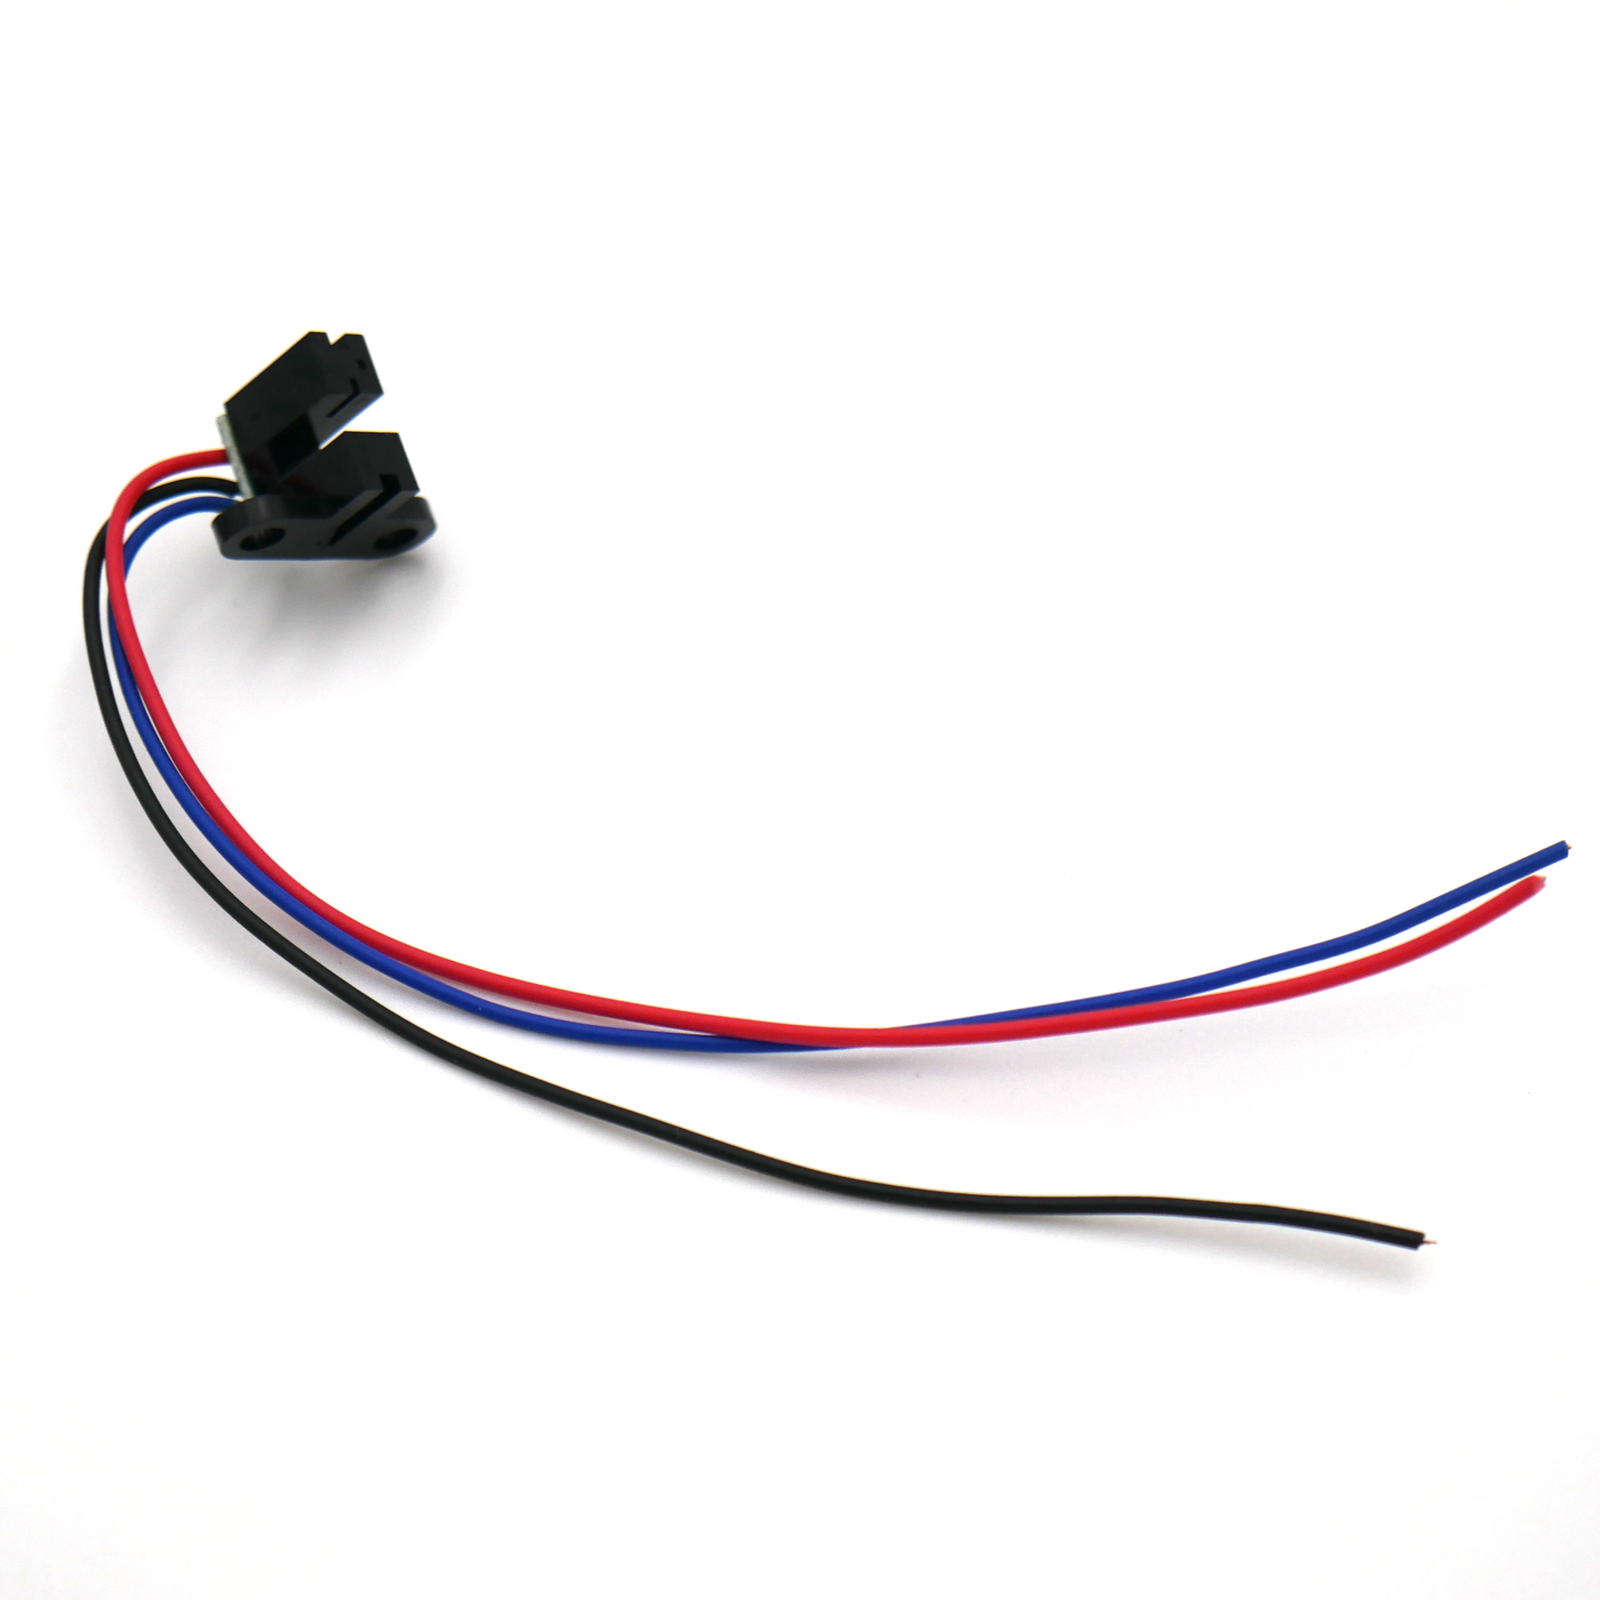 Coding position sensor with red, black and blue cables.